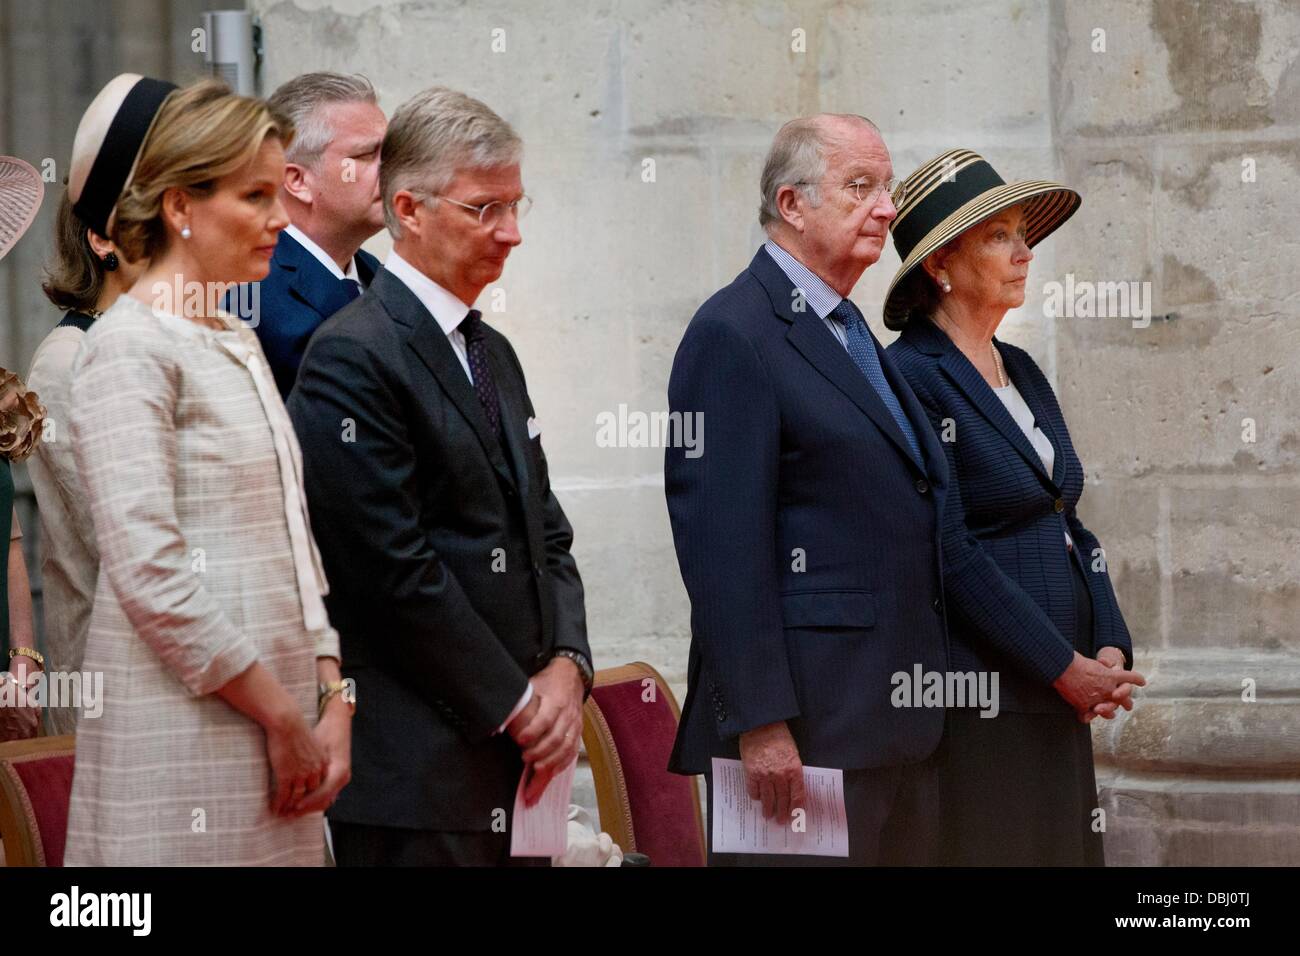 Brussels, Belgium. 31st July, 2013. King Philippe (Filip), Queen Mathilde, King Albert and Queen Paola of Belgium attend the mass to commemorate the death of King Baudouin 20 years ago at the Cathedral in Brussels, Belgium, 31 July 2013. Photo: Patrick van Katwijk/dpa/Alamy Live News Stock Photo